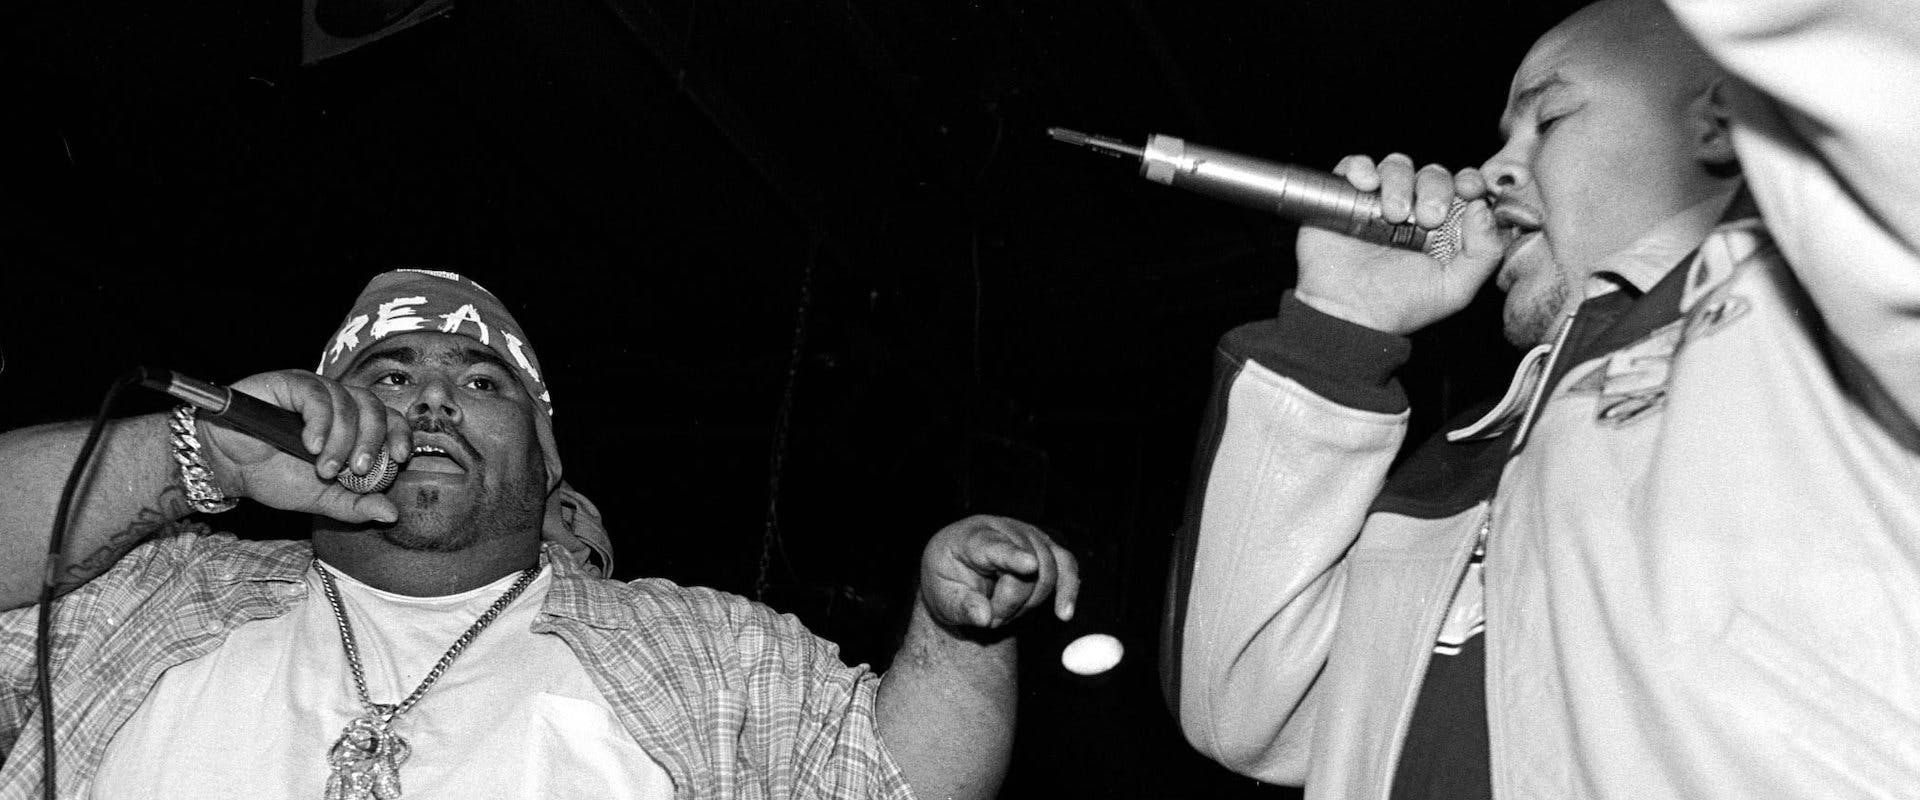 Big Pun and Fat Joe performing at Les Poulets on May 13, 1998.This image:Big Pun (Christopher Lee Rios), left, and Fat Joe (Joseph Antonio Cartagena).(Photo by Hiroyuki Ito/Getty Images)